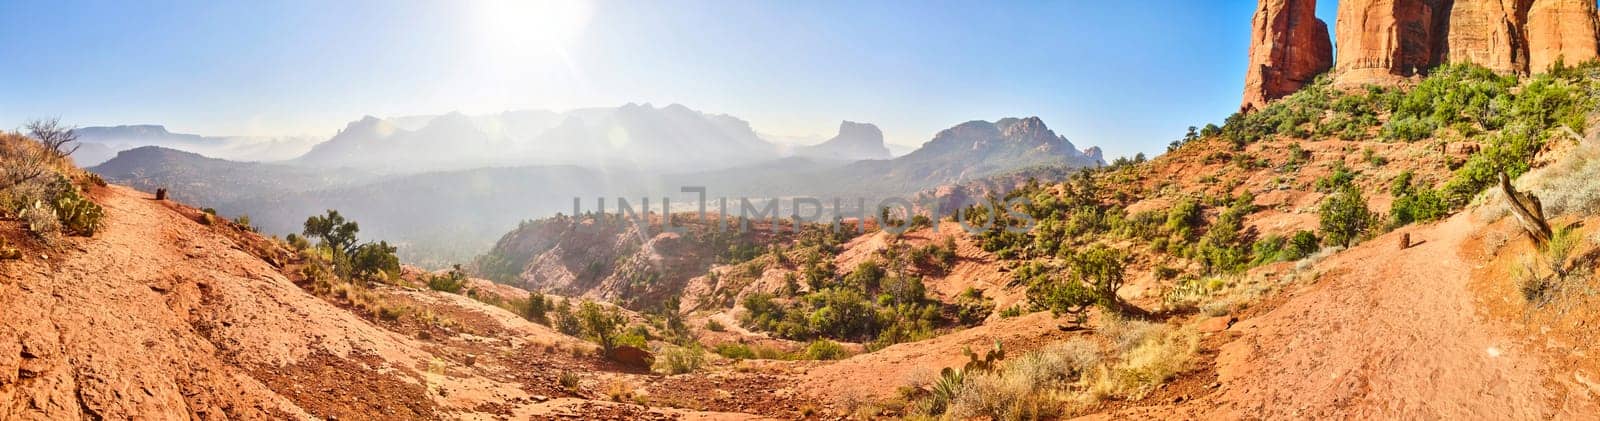 Golden hour panorama of Arizona's rugged desert landscape featuring Sedona's red sandstone formations, 2016